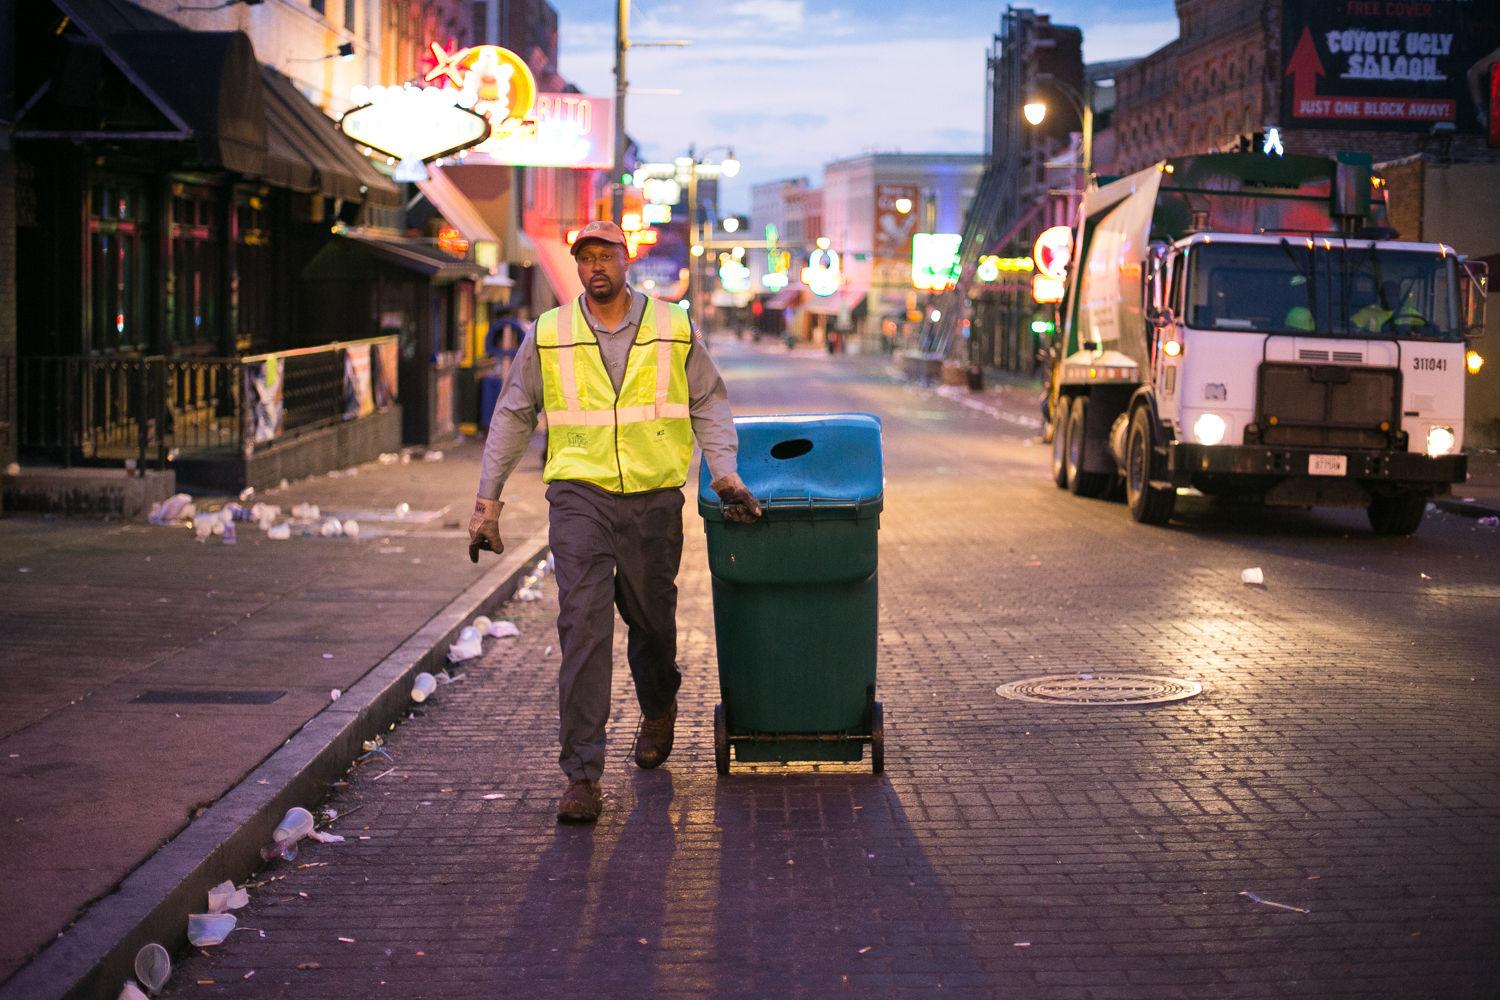   While most people are asleep in their beds, six-seven big Kevin is just finishing his clean sweep on Beale Street. He and his co-worker empty every last trash can that lines the Memphis party strip.   